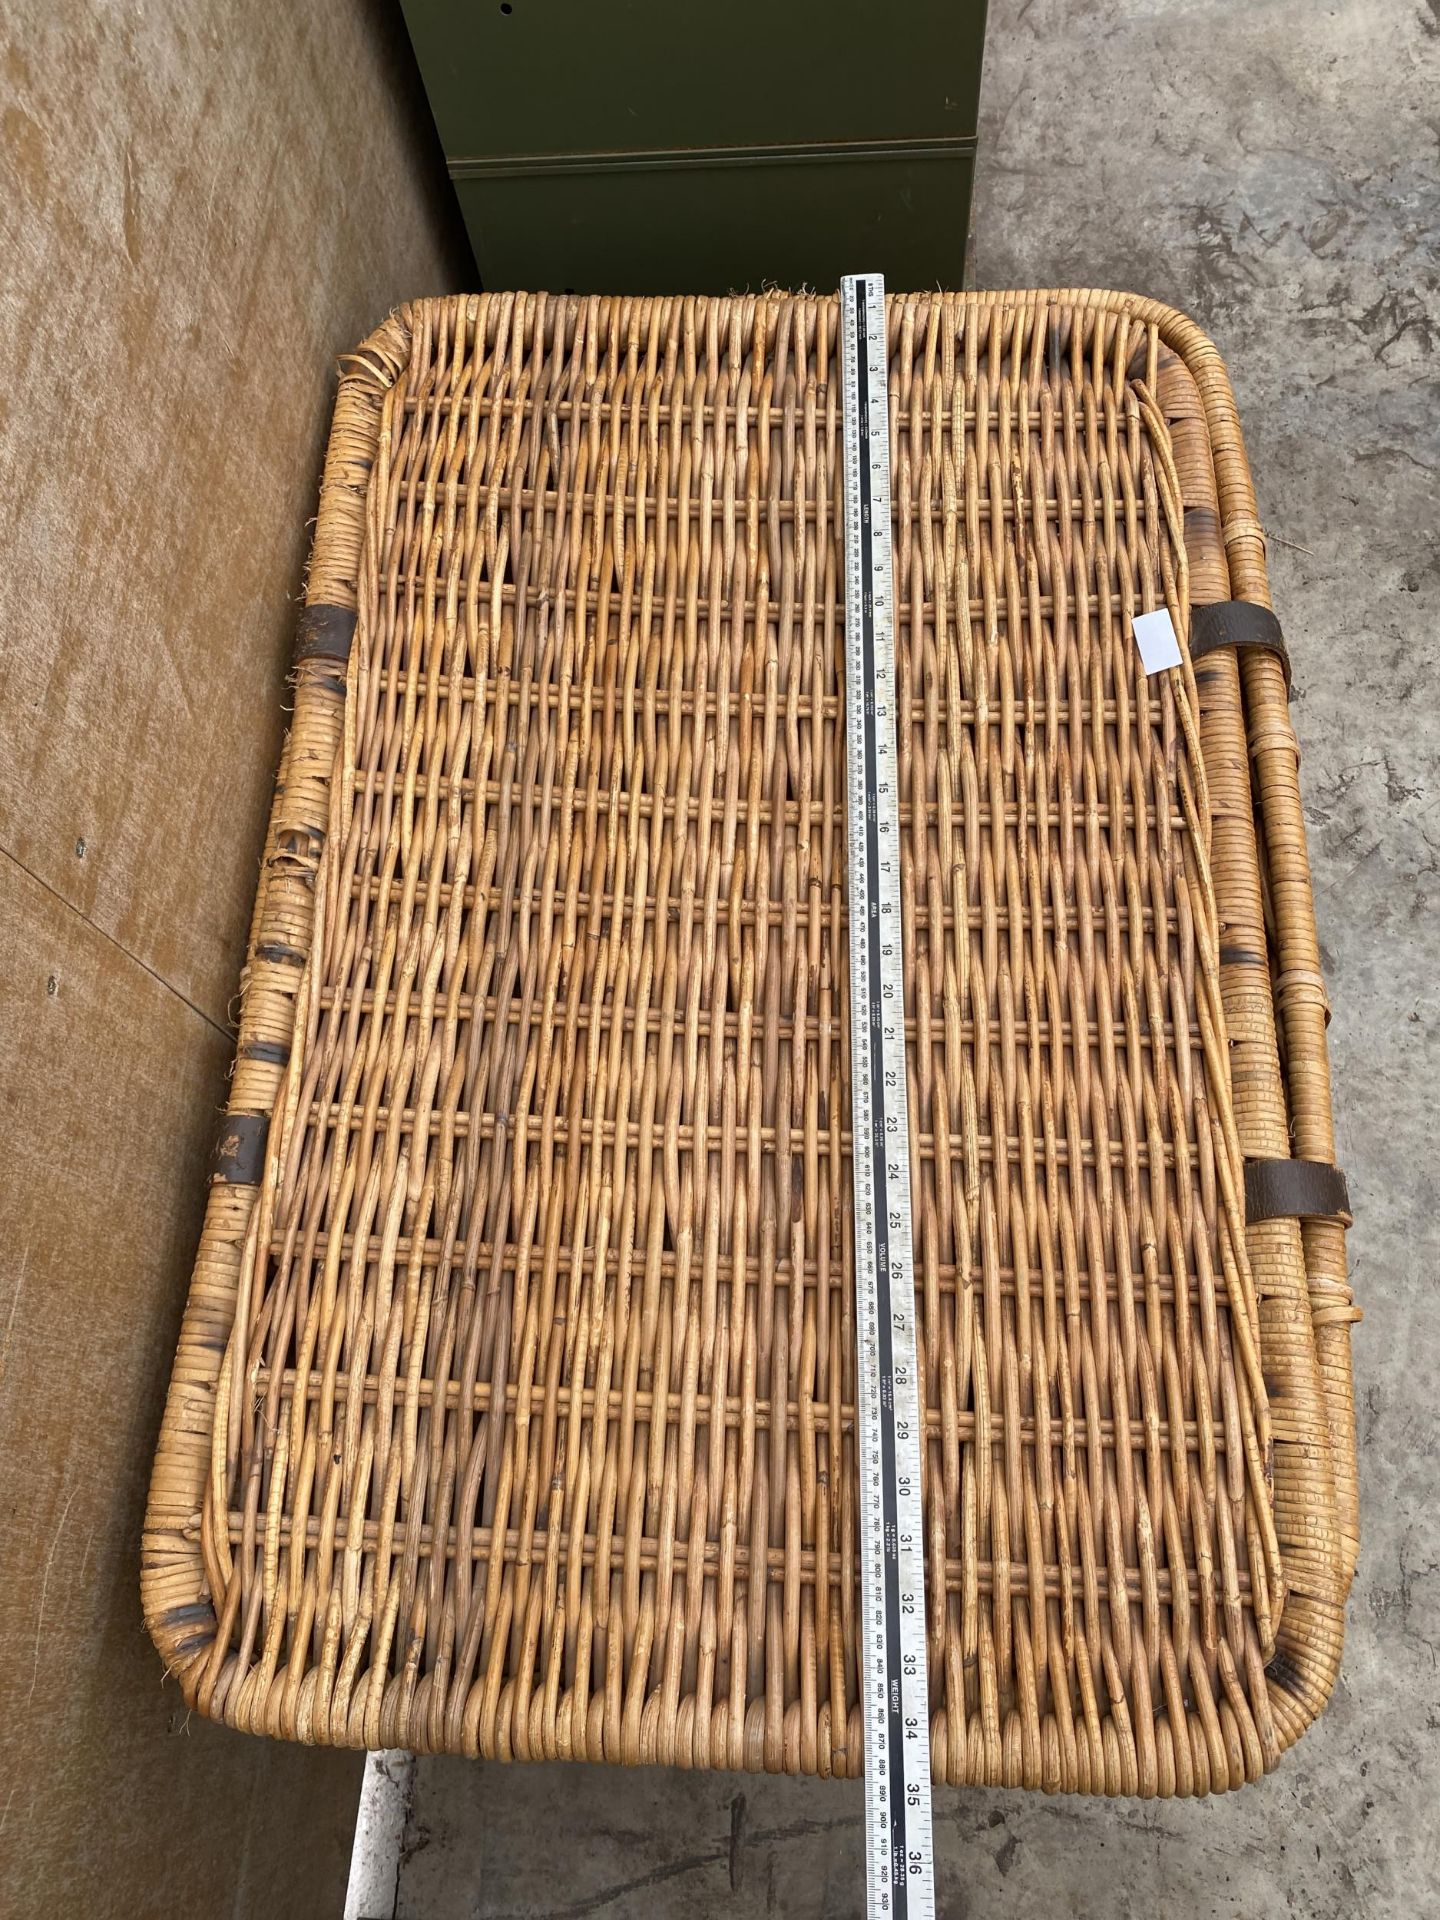 A LARGE WICKER LOG BASKET WITH HINGED LID AND LEATHER STRAPPING - Image 3 of 4